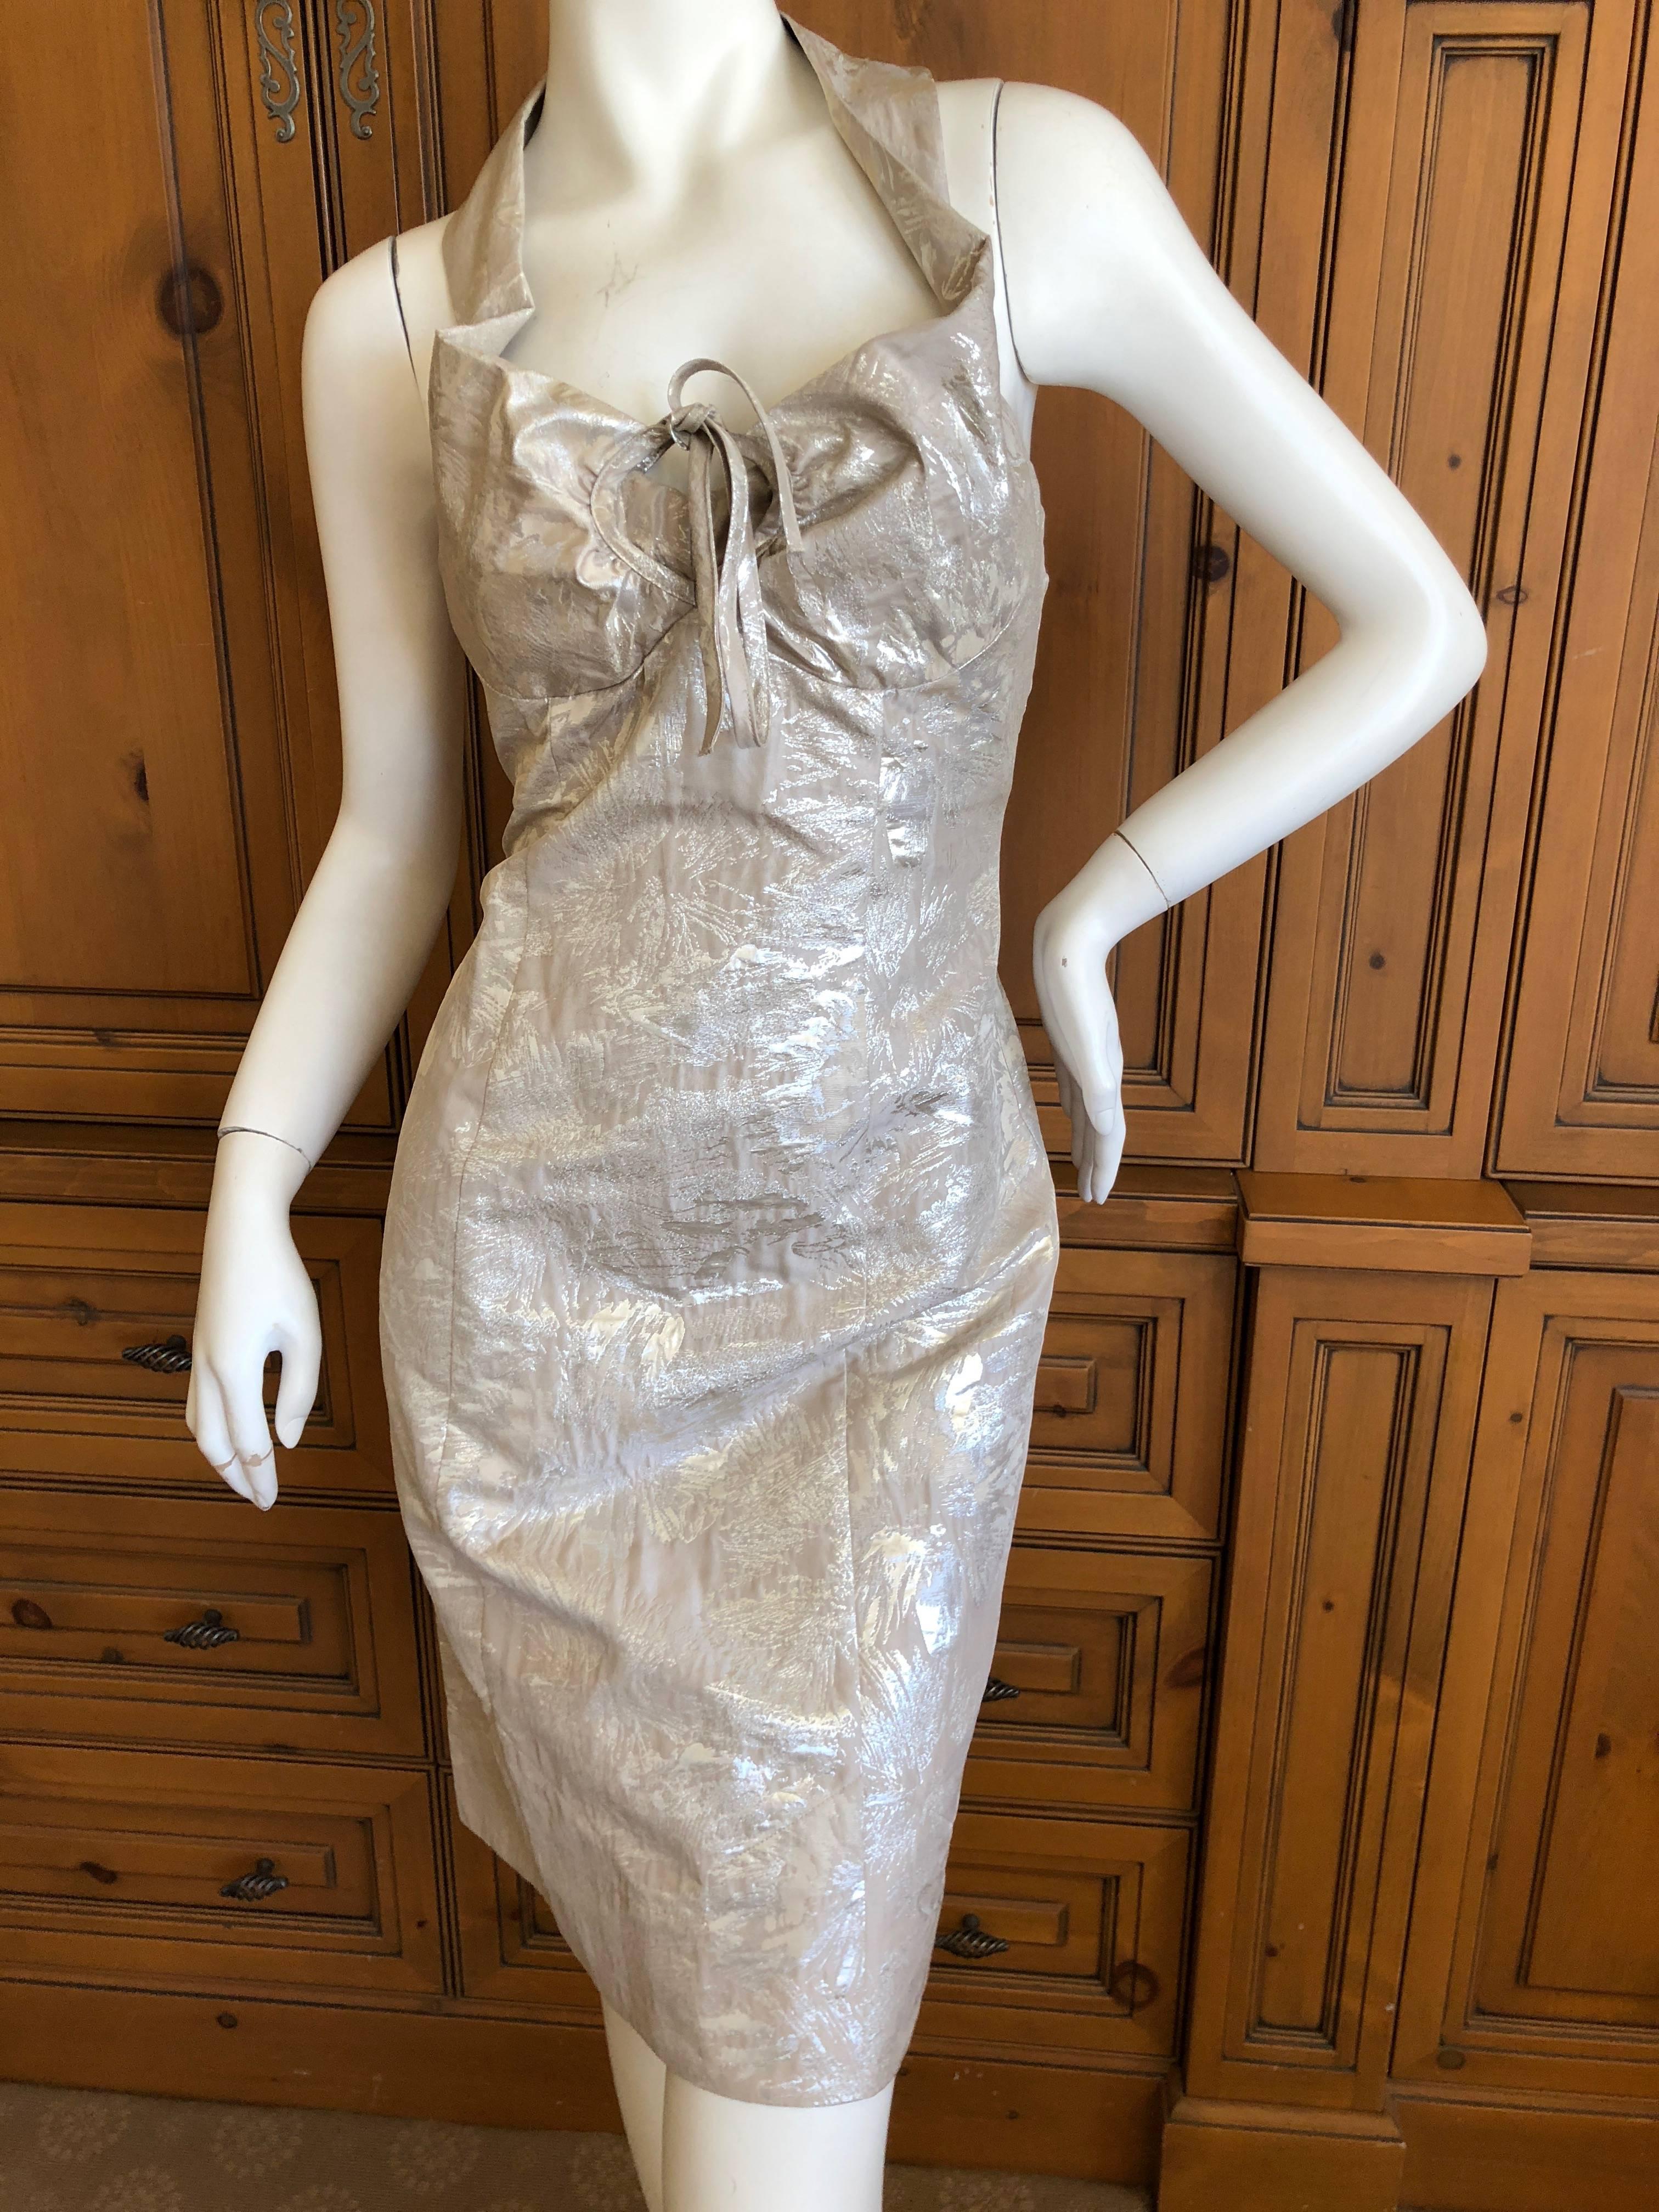 Vivienne Westwood Red Label Silver Brocade Dress with Cross Back New with Tags In Excellent Condition For Sale In Cloverdale, CA